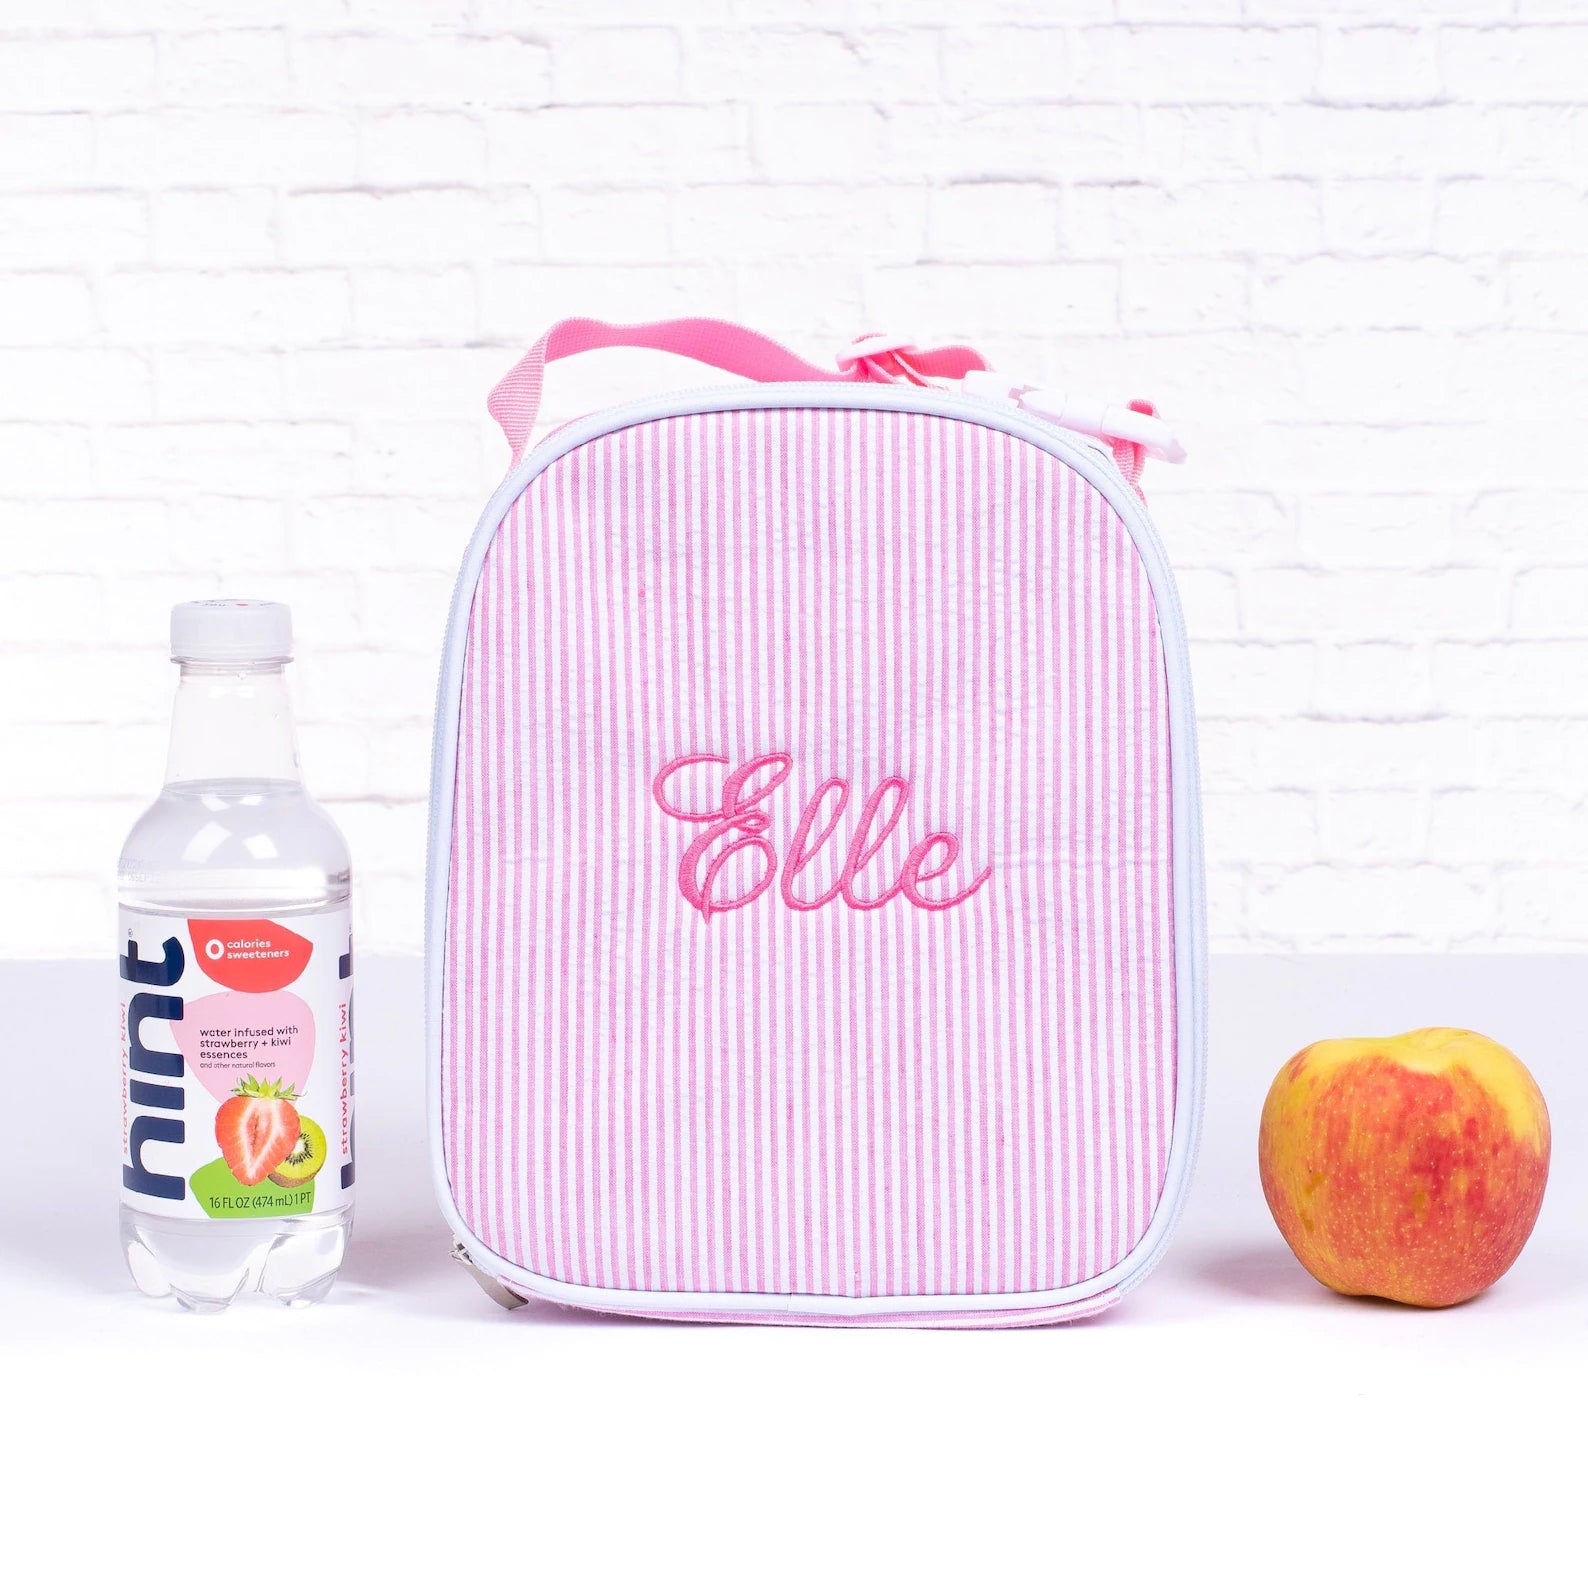 Monogram Lunchbox, Monogram Lunch Bag, Personalized Cooler Tote